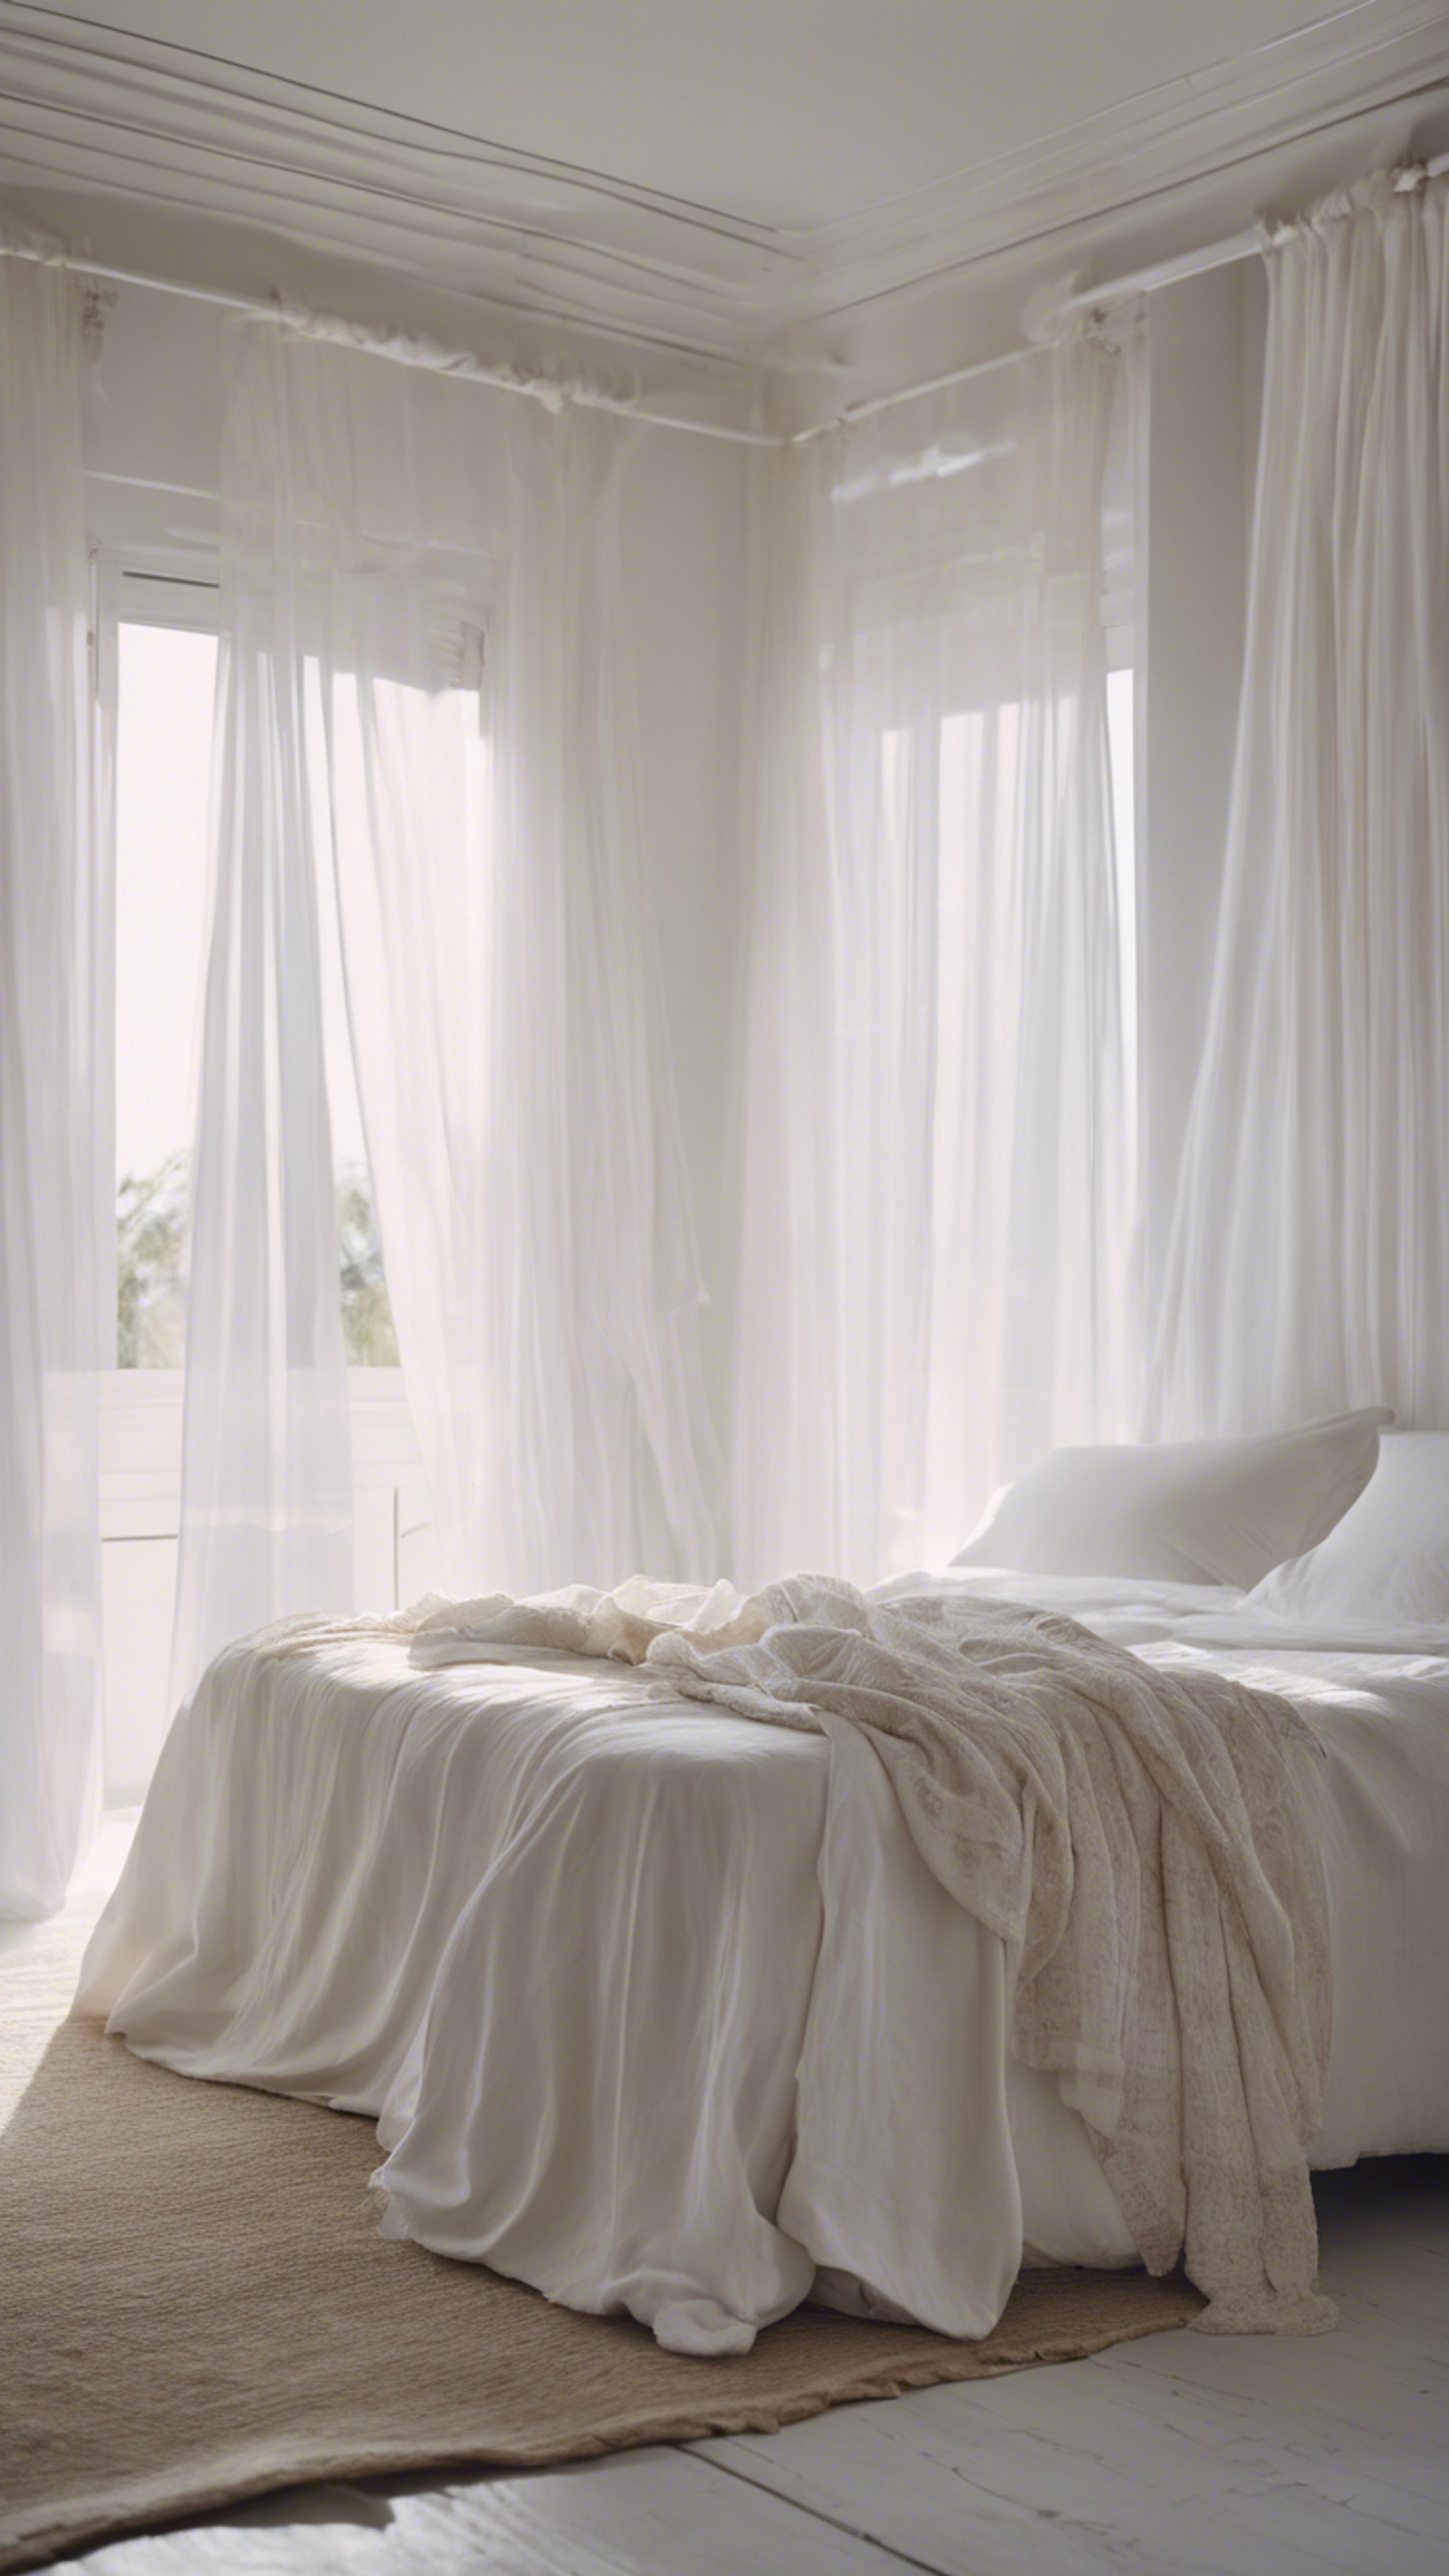 A dreamy white bedroom with sheer curtains blowing in the wind, white bed linens and an array of daylight from the window. 벽지[01f8a65ac1ab4b5d8d2d]